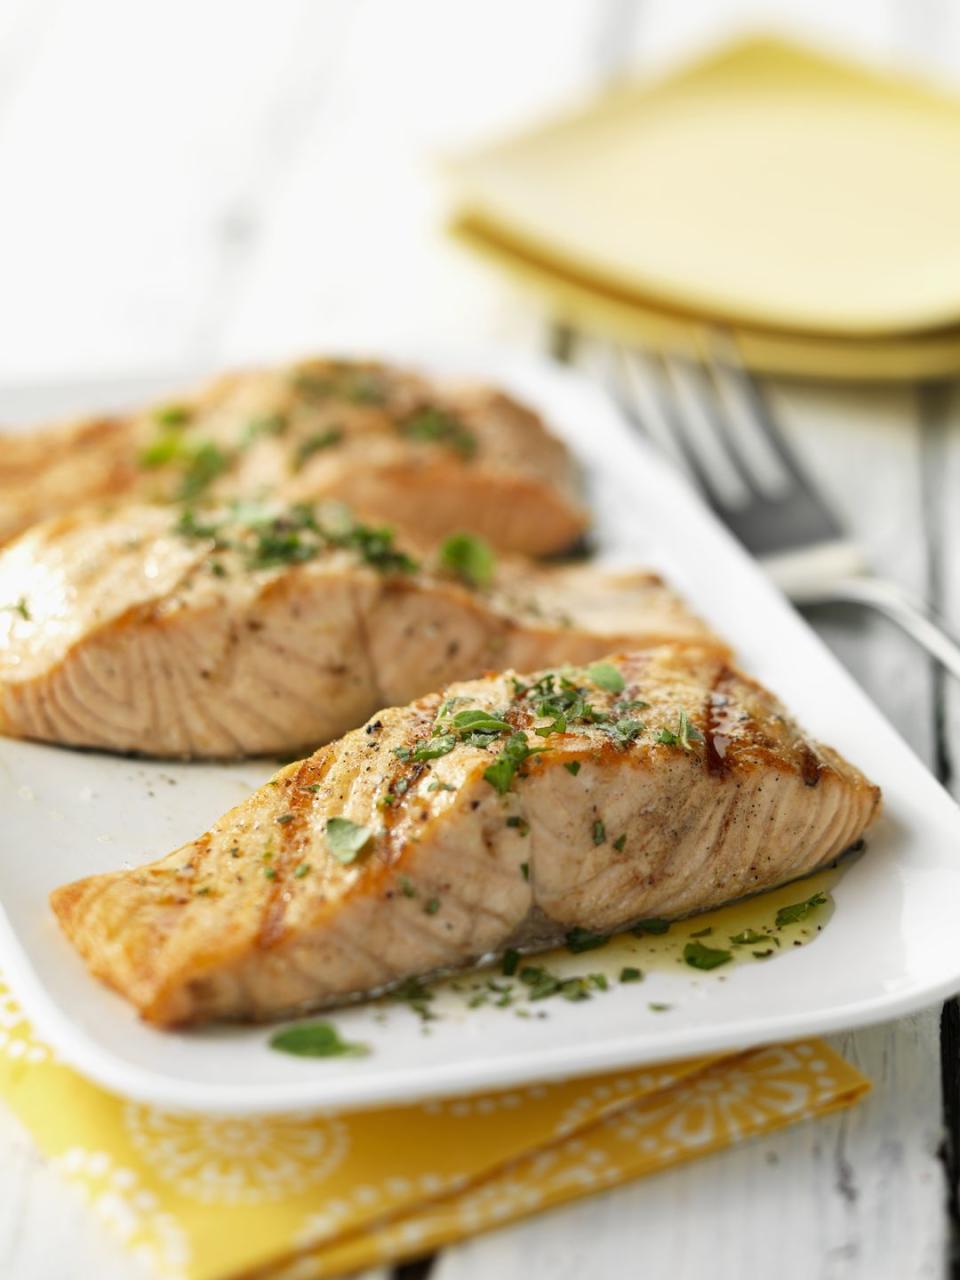 <p>"The <a href="https://www.goodhousekeeping.com/food-recipes/healthy/g902/myplate-inspired-seafood-recipes/" rel="nofollow noopener" target="_blank" data-ylk="slk:fish's high amounts of omega-3 fatty acids" class="link ">fish's high amounts of omega-3 fatty acids</a> help reduce inflammation, which can affect how skin looks," explains Tamara Melton, M.S., R.D.N., L.D. Nutrients like vitamin D and antioxidants can also reduce the risk of skin cancer and help with acne and rosacea, adds Lauren Ploch, M.D., M.Ed., FAAD, a New Orleans-based dermatologist.</p>